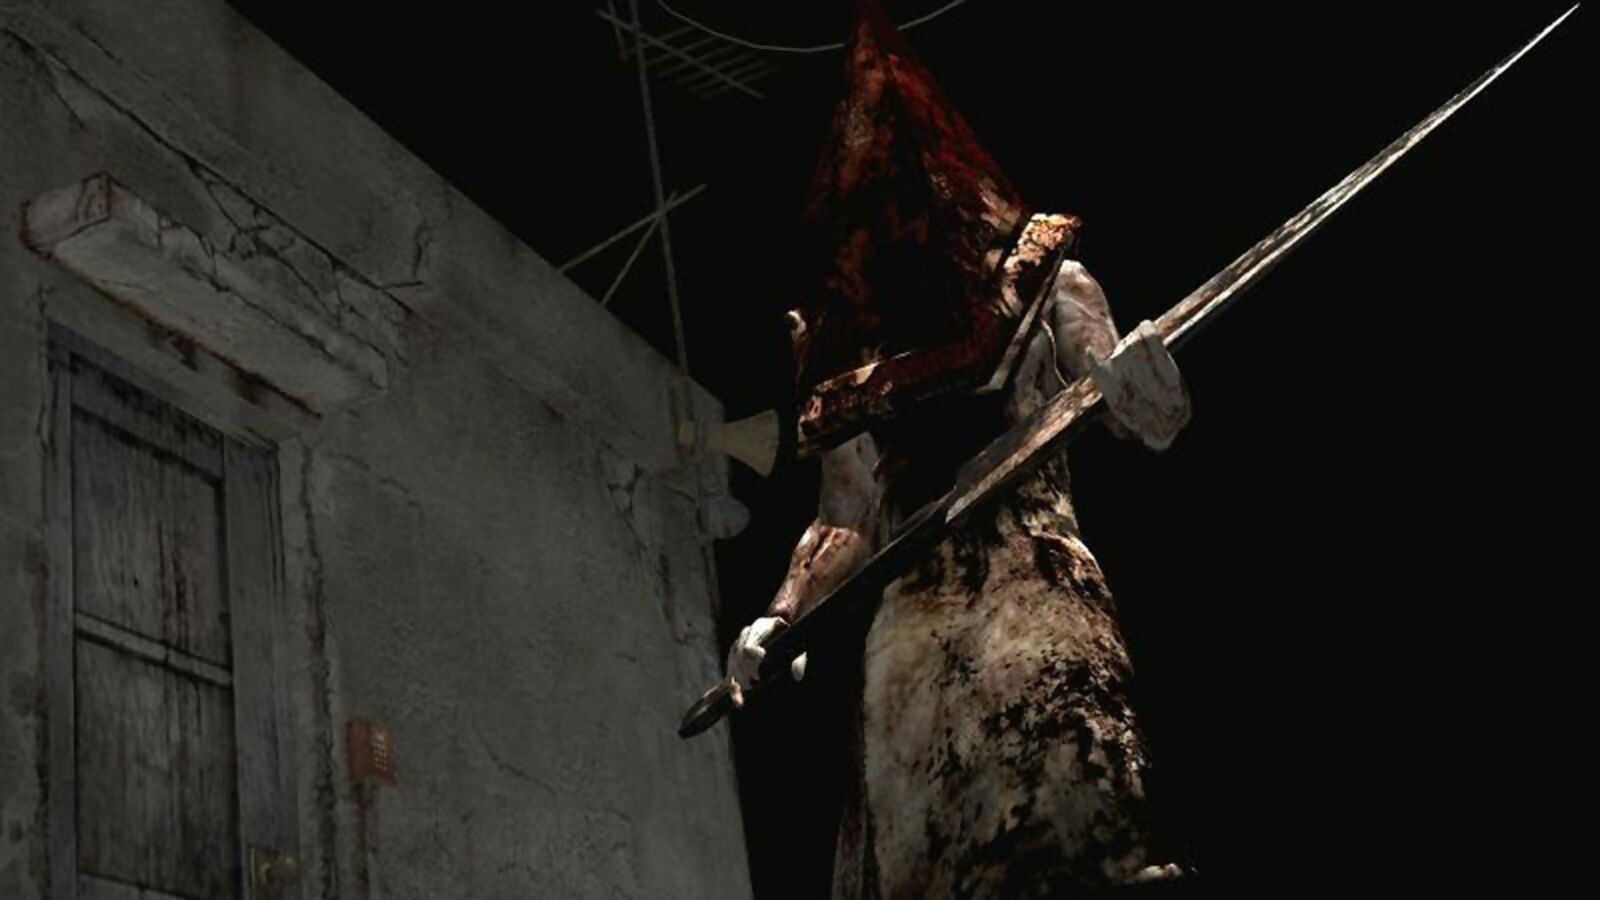 Silent Hill 2 and Bloober Team could actually be a scarily great